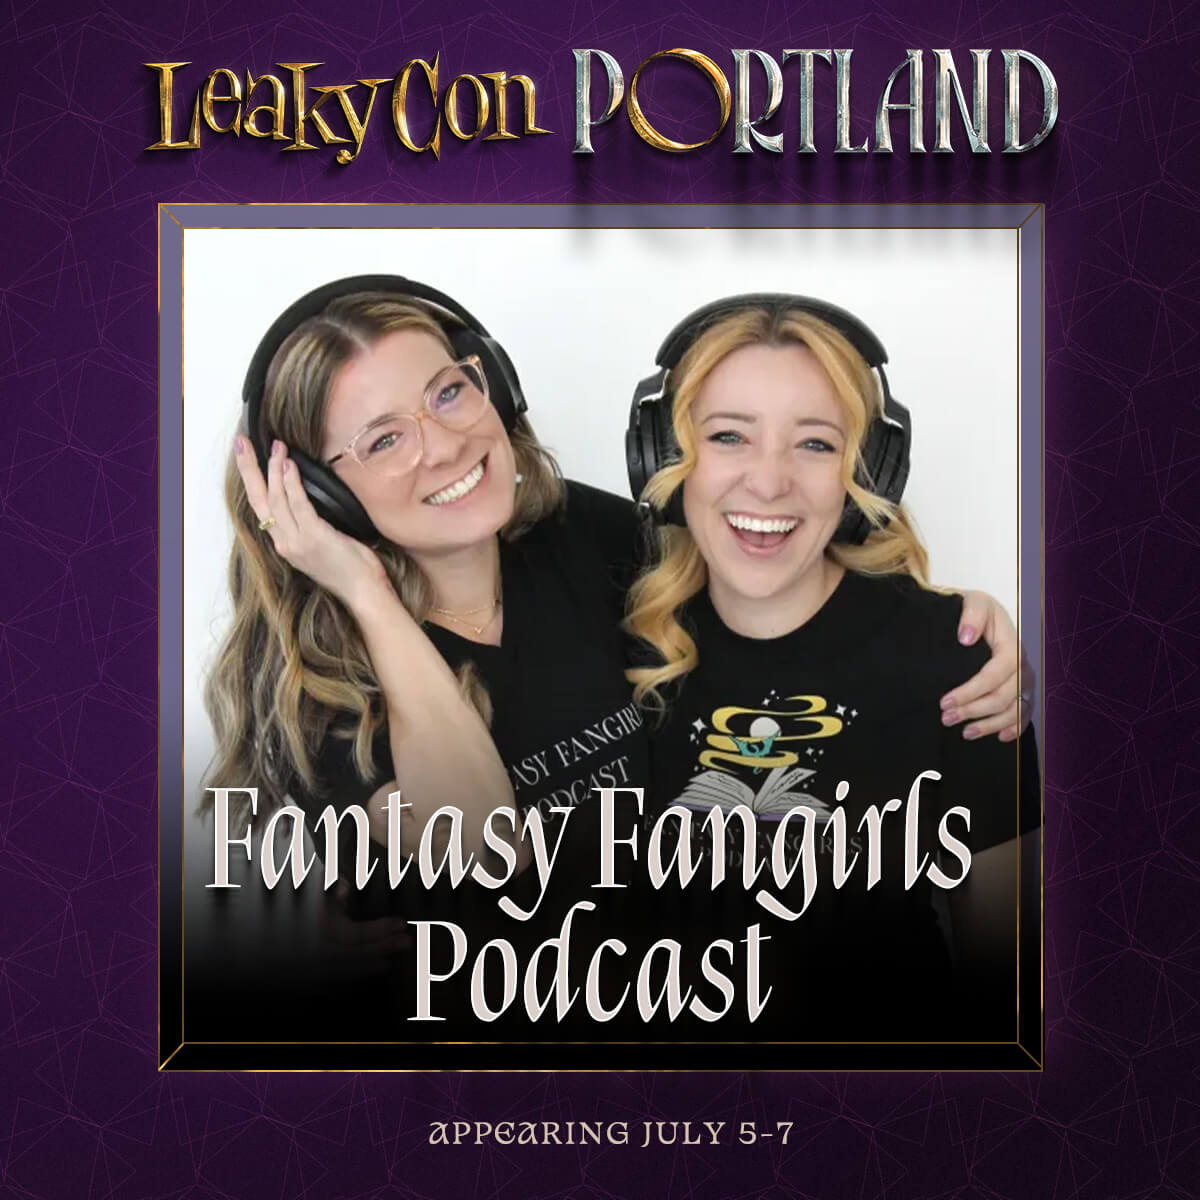 Big news! 🎉 We're thrilled to welcome the Fantasy Fangirls podcast to #LeakyCon for the very first time! Get your tickets at leakycon.com